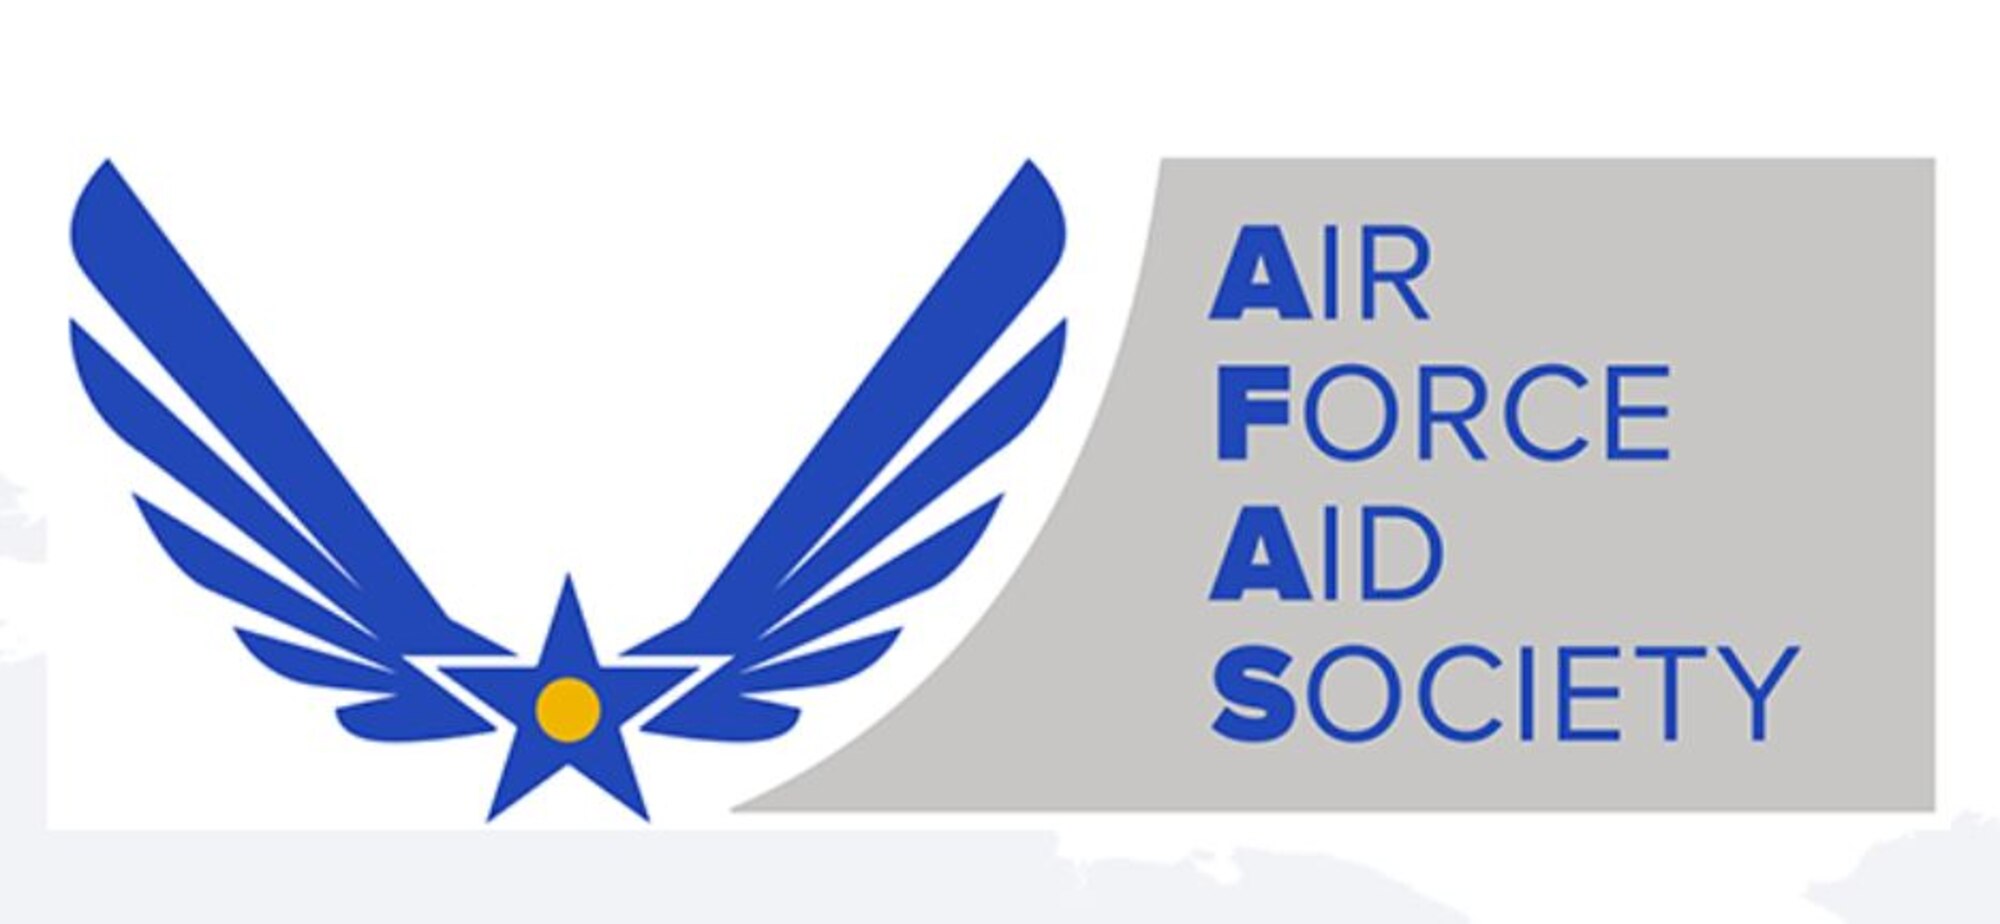 The Air Force Aid Society has been meeting the unique needs of Airmen and their families since 1942. Our founder, General Henry H. “Hap” Arnold, created a relief organization that emphasized the ideal of Airmen helping Airmen. Since then, AFAS works every day to support and enhance the USAF mission by providing emergency financial assistance, educational support and community programs. (Air Force Aid Society graphic)